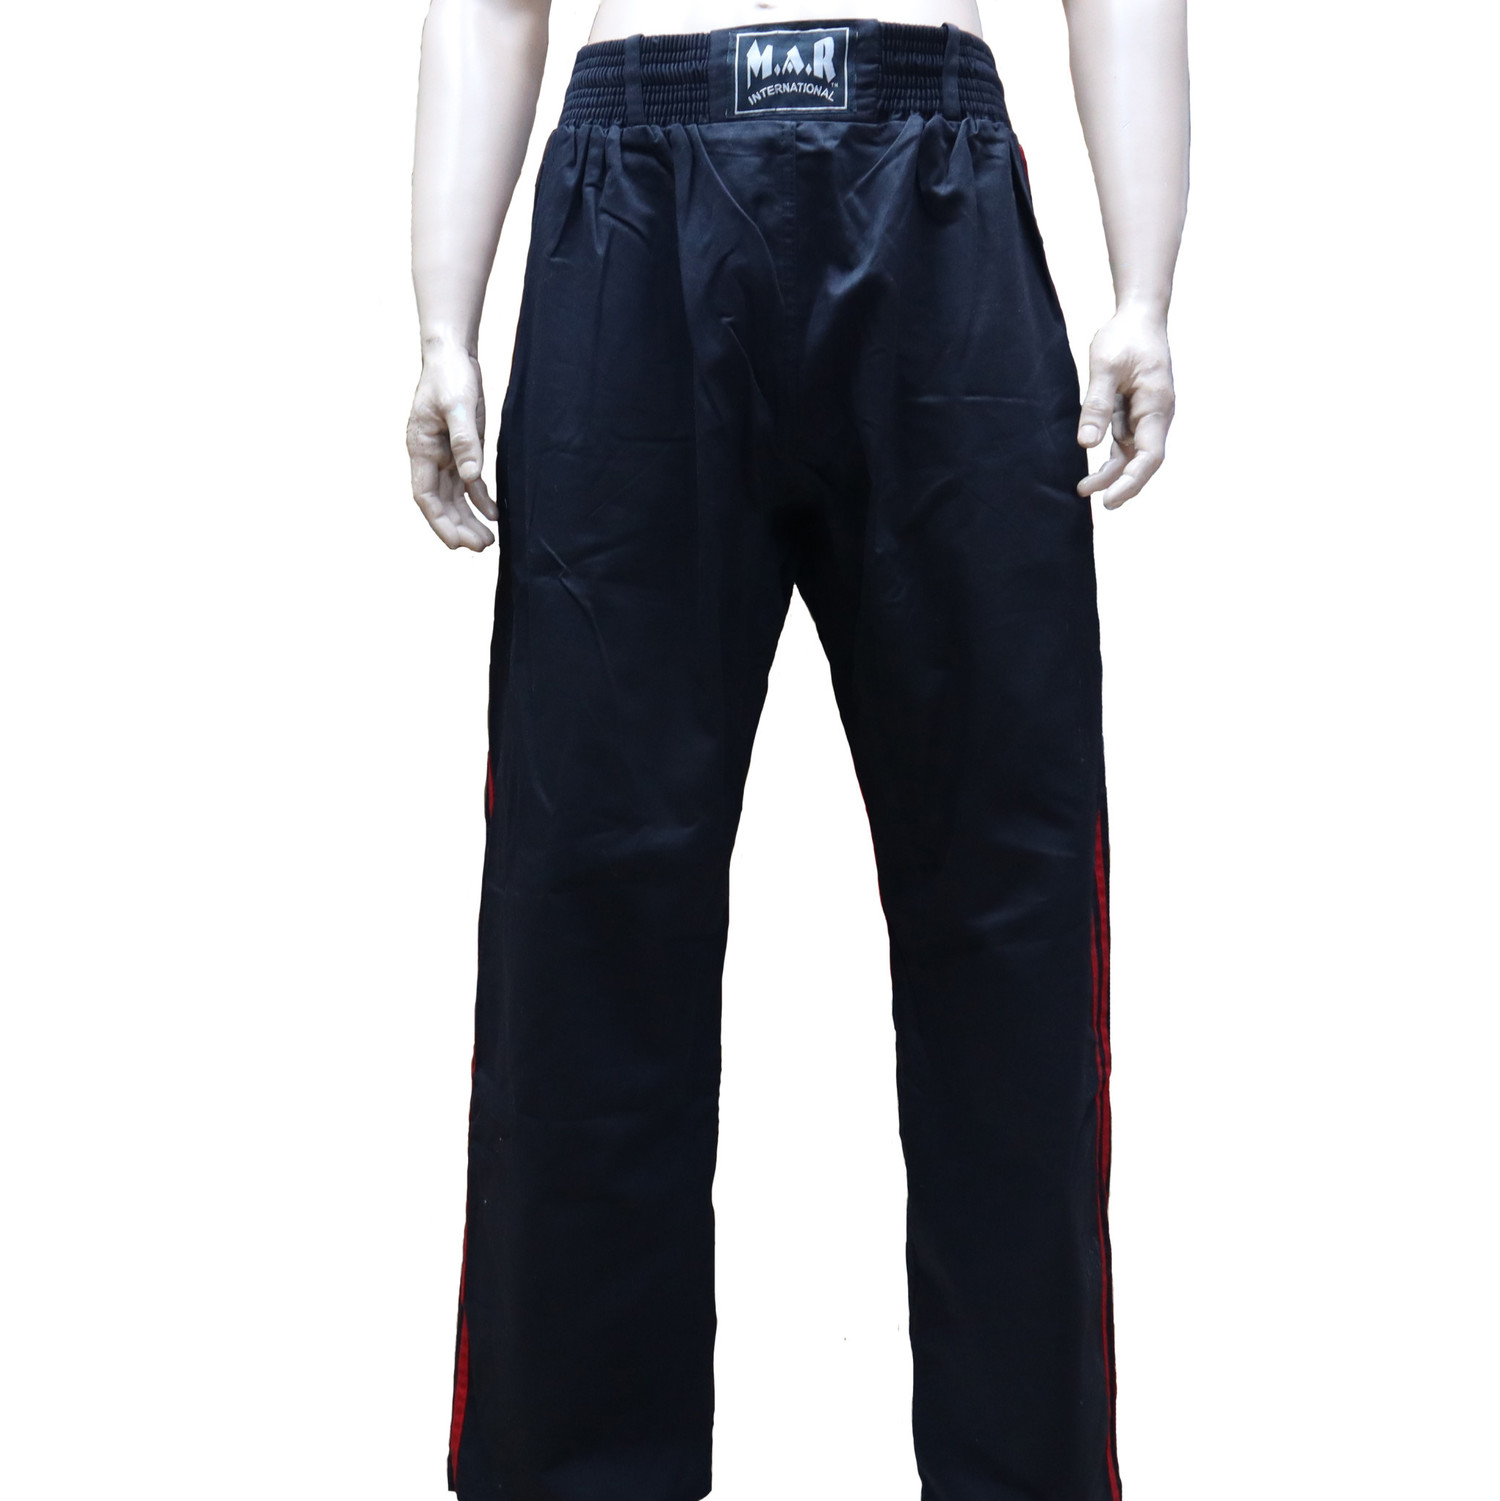 black kickboxing trousers cotton with red stripes